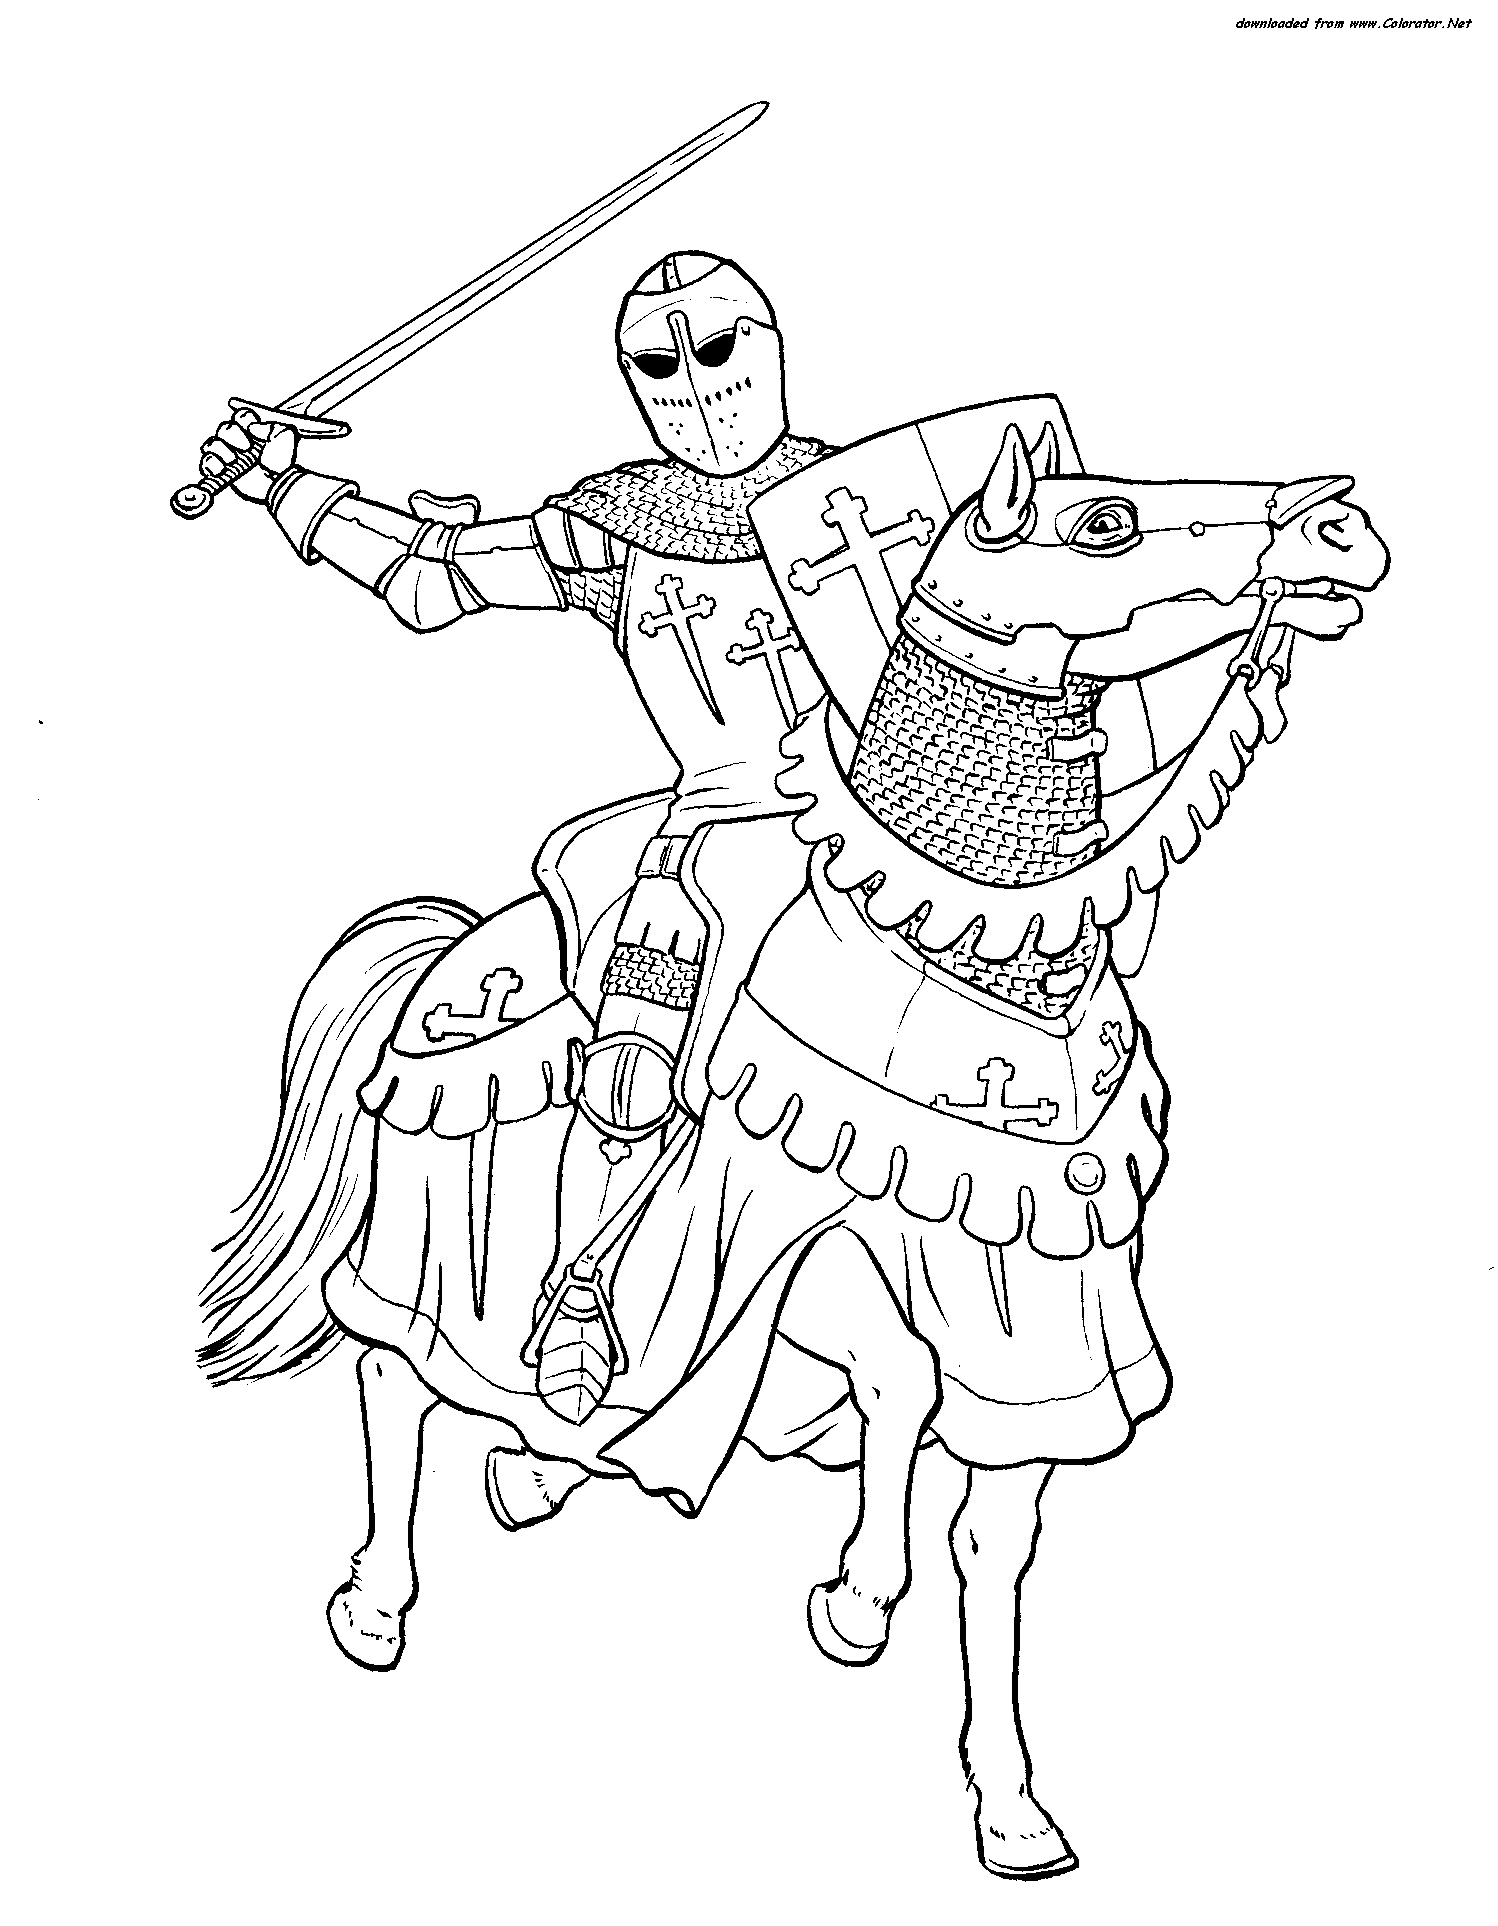 941 Cartoon Knight Rider Coloring Pages with Animal character